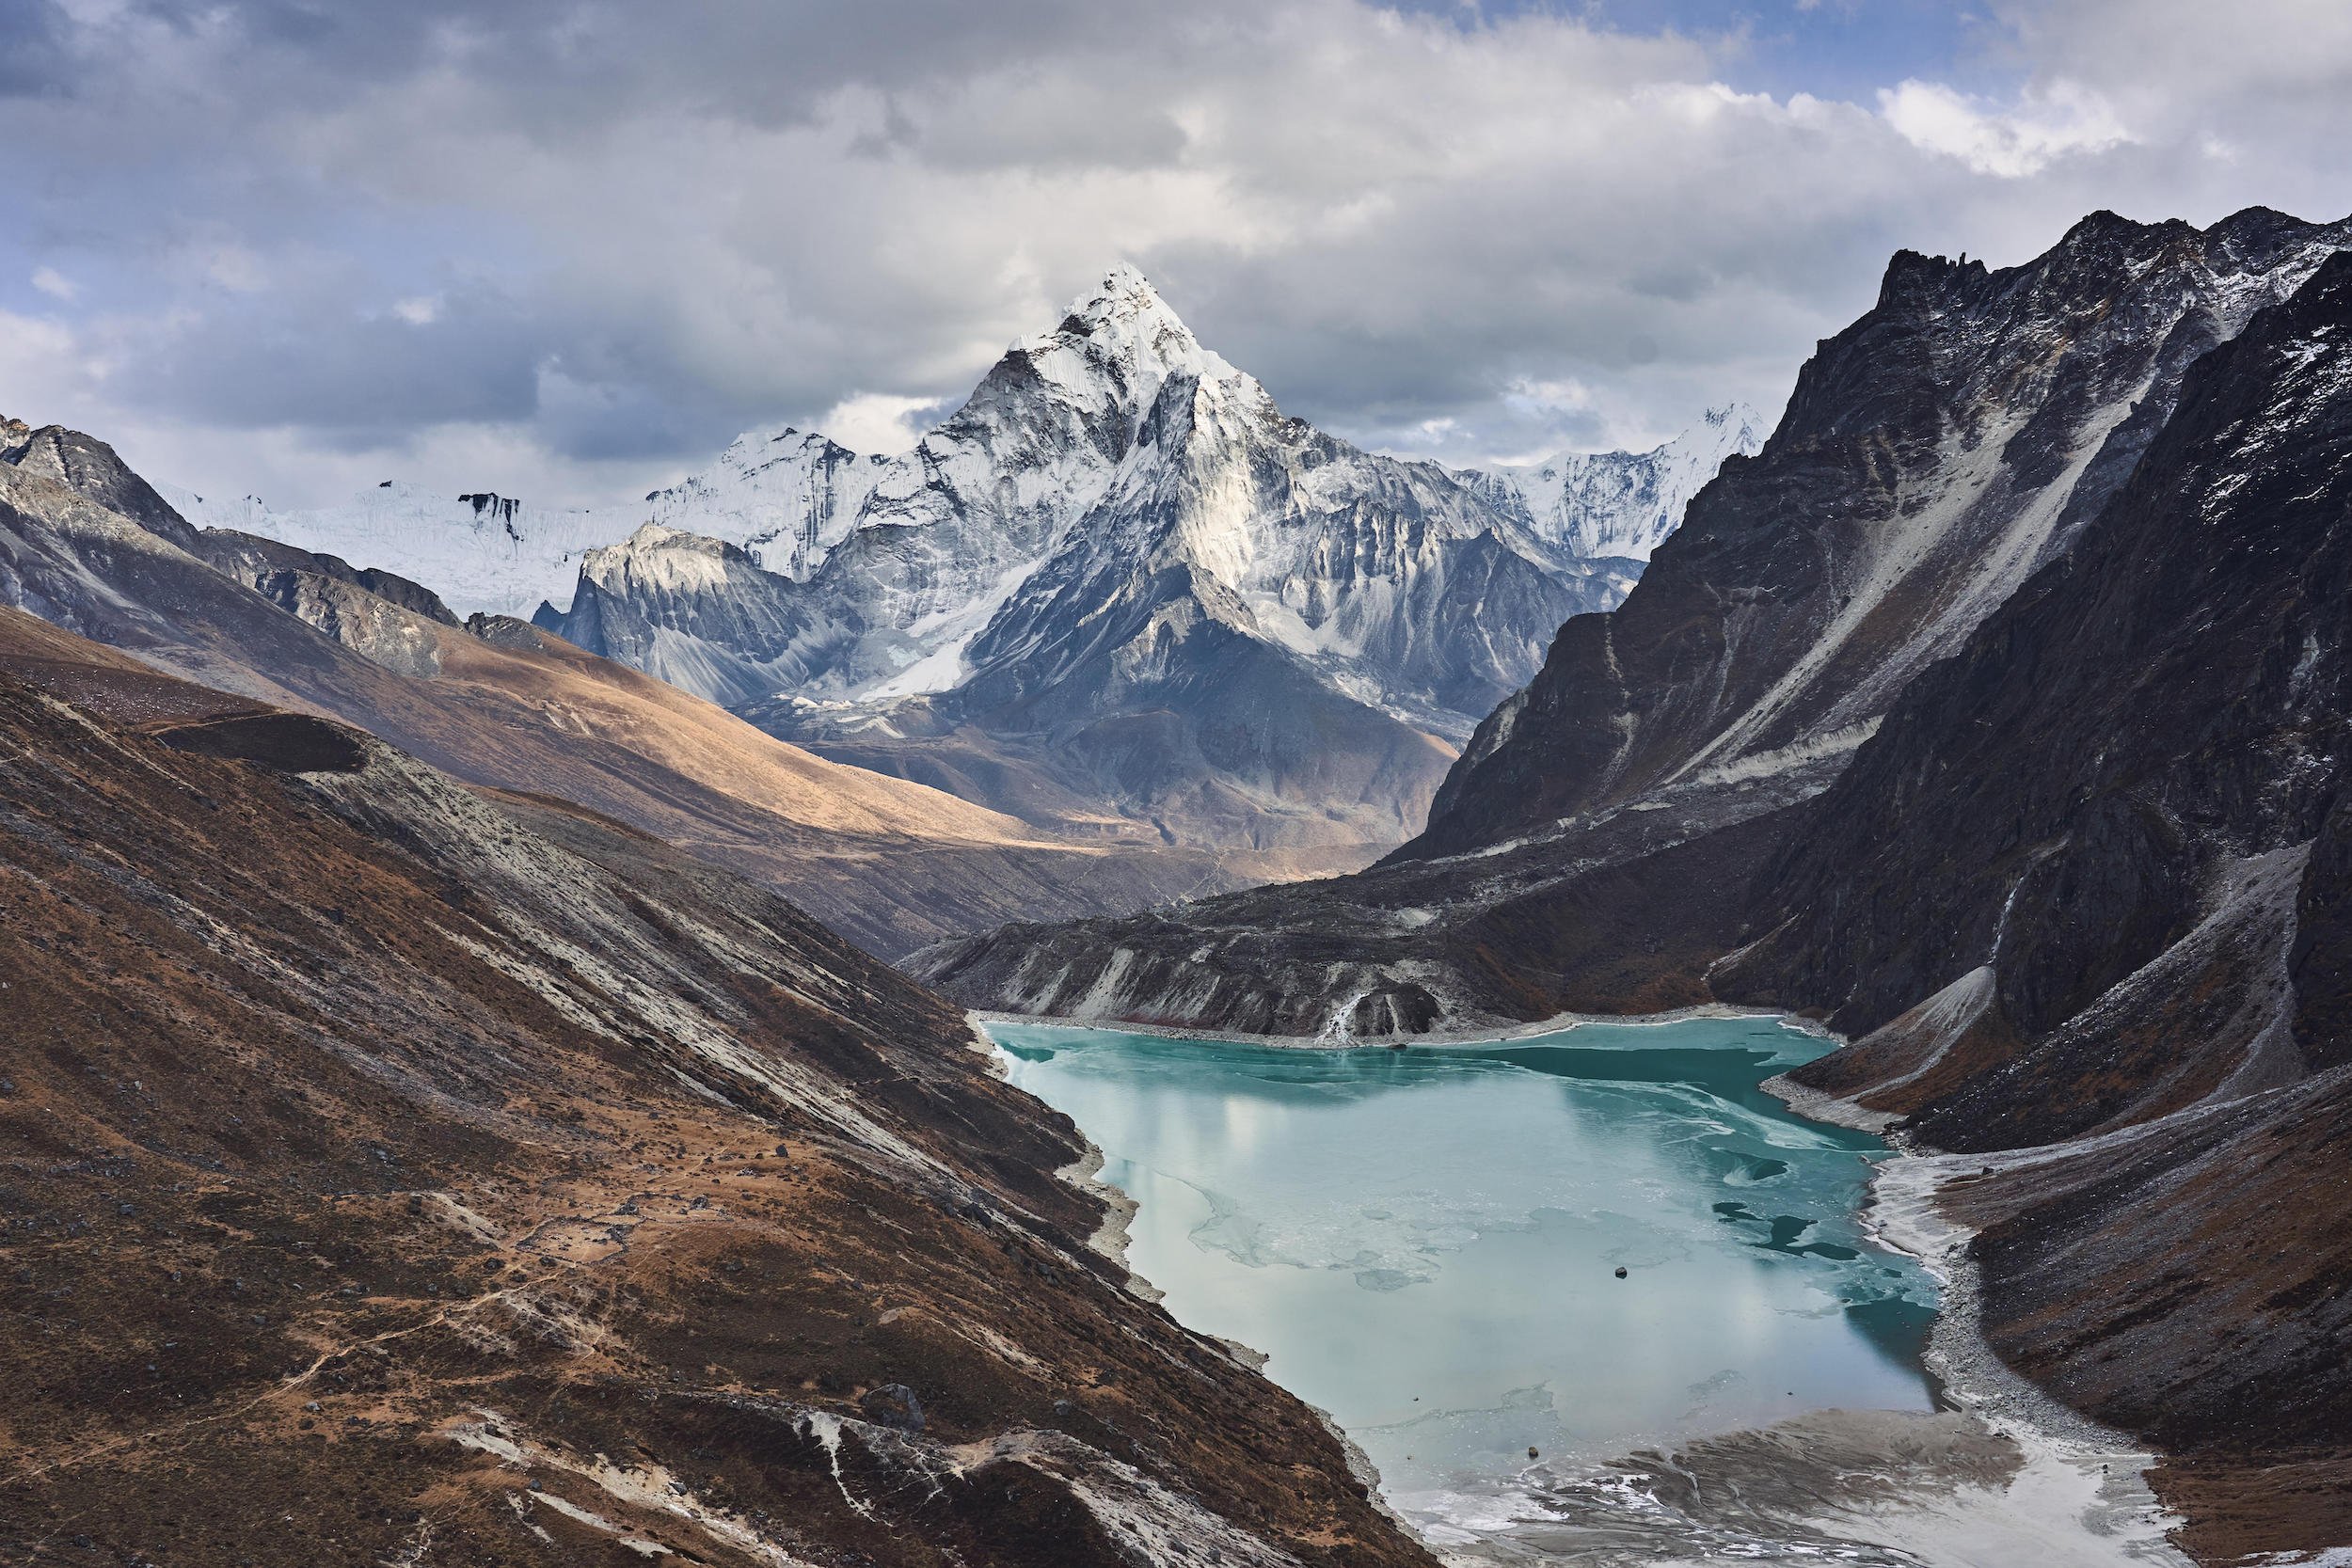 <p>A glacial lake in front of Ama Dablam, a mountain in Nepal [Image by: Zoonar GmbH/Alamy]</p>